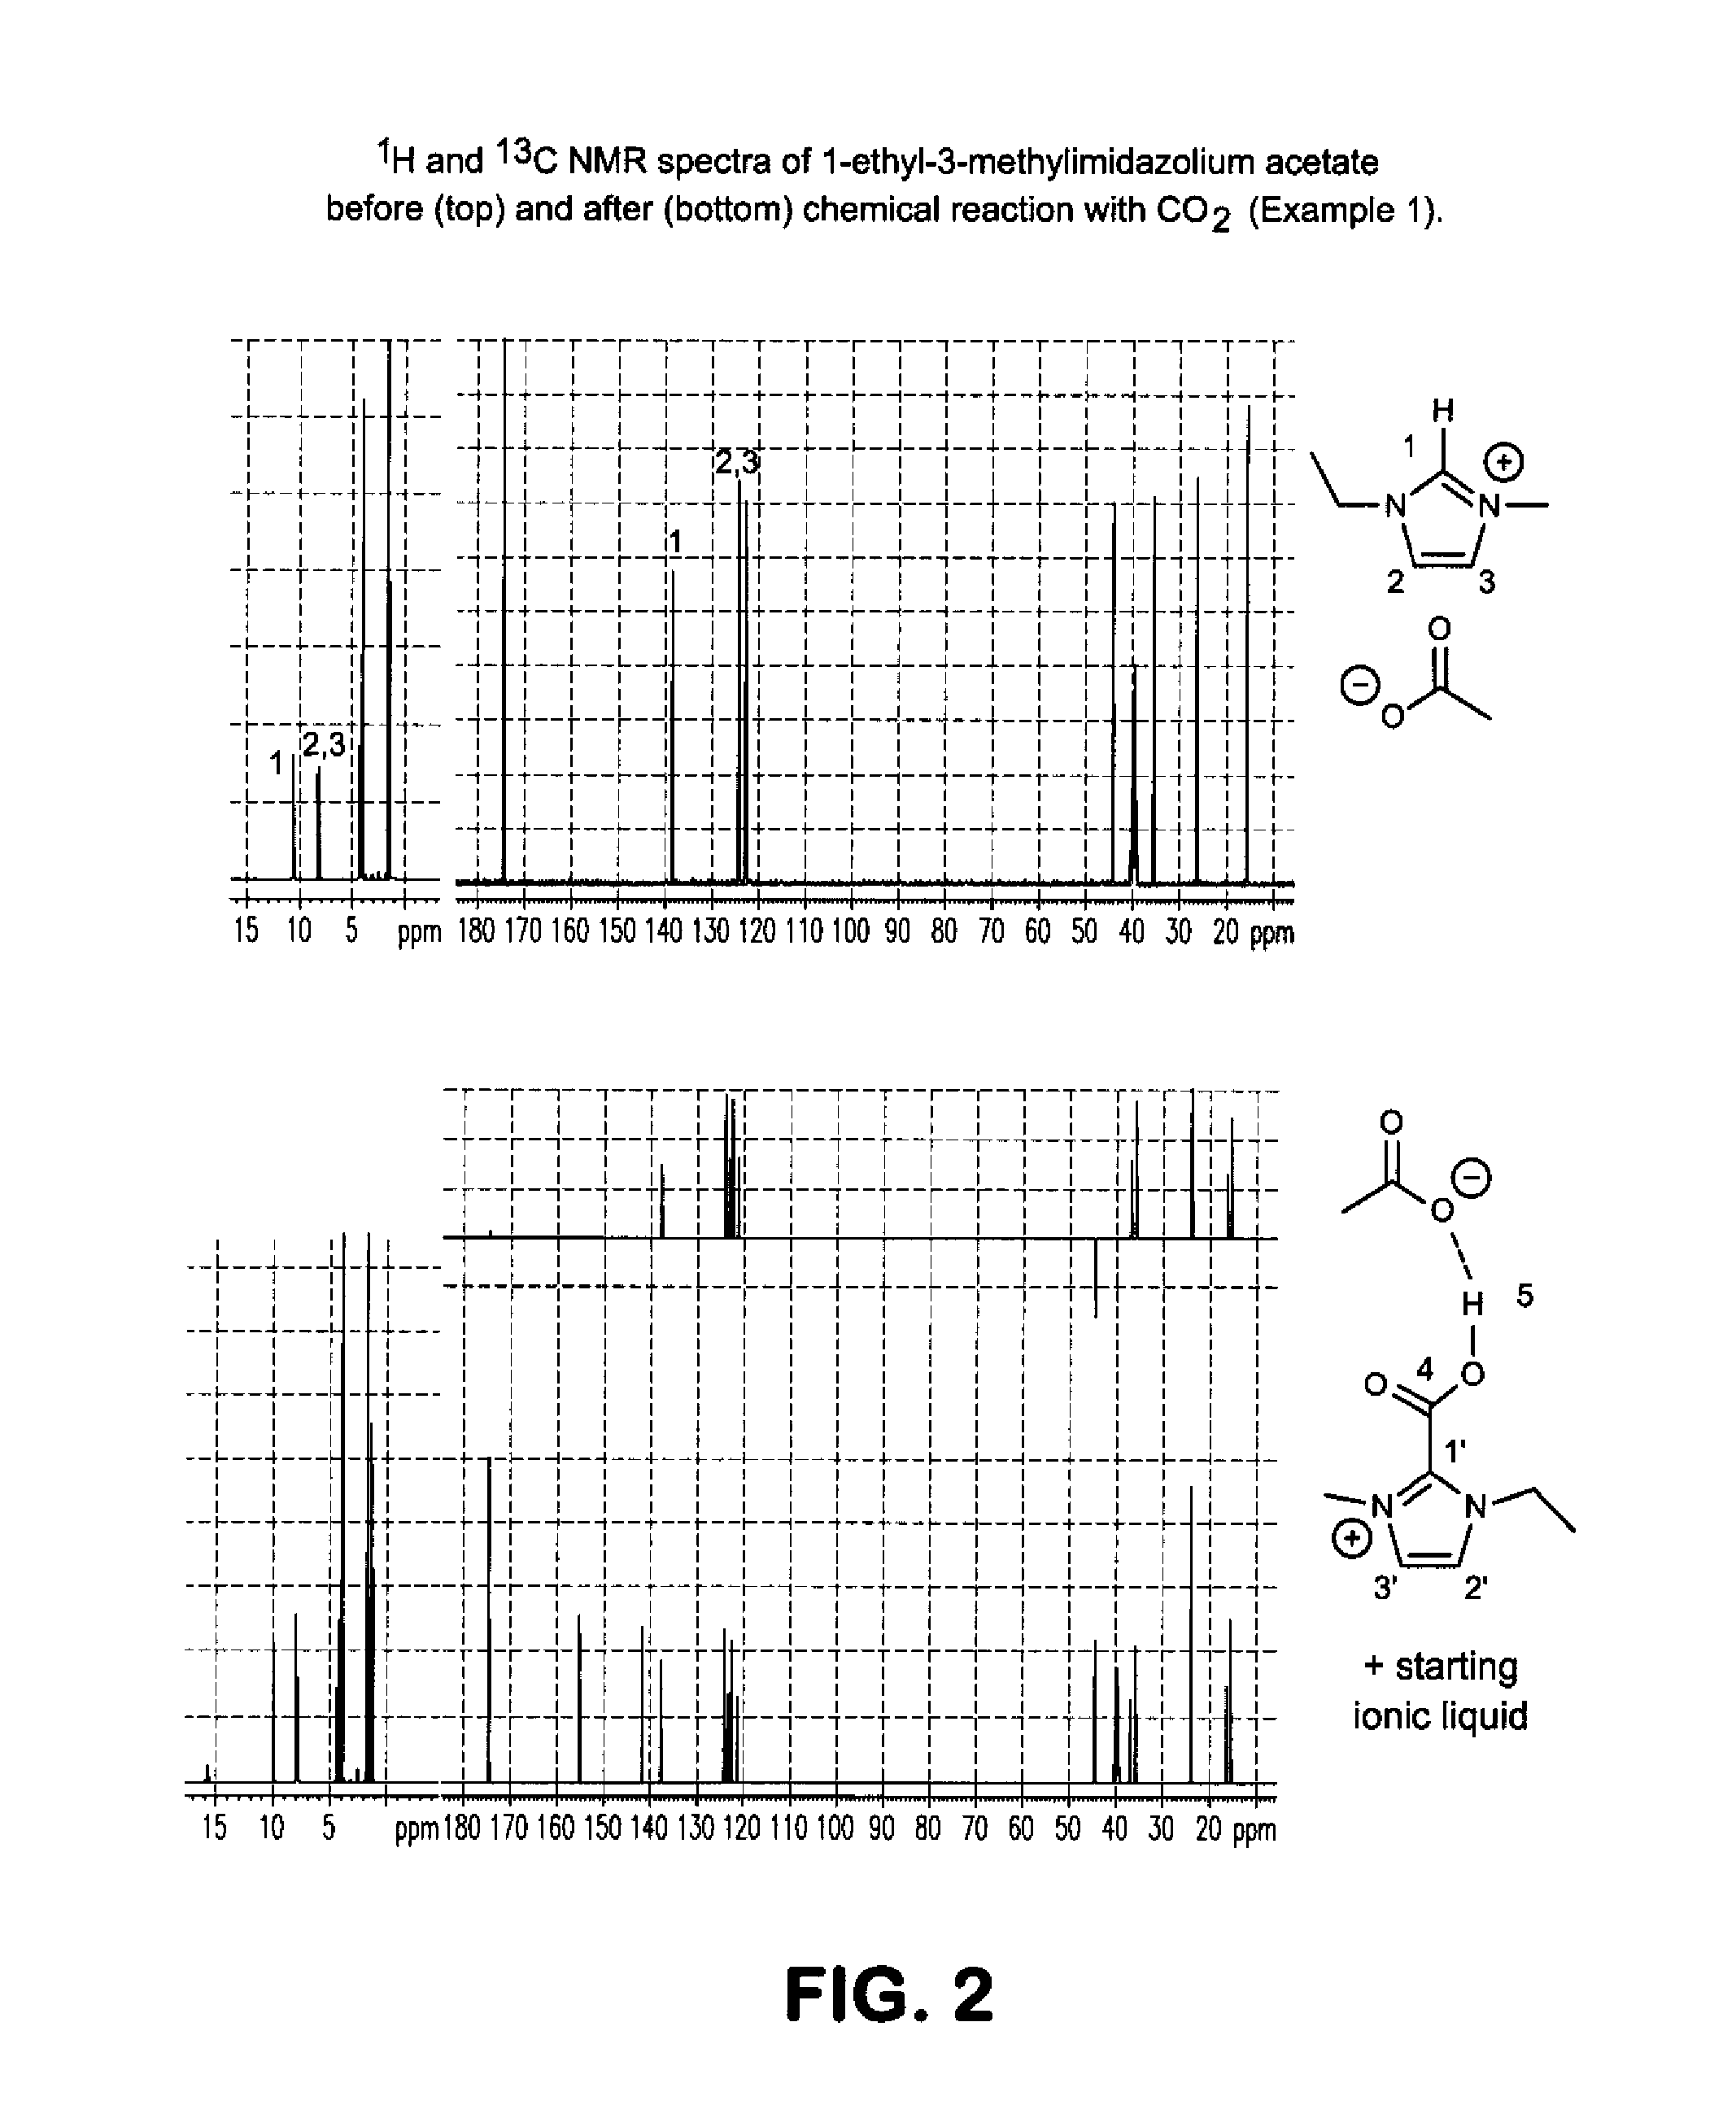 Ionic liquids for removal of carbon dioxide